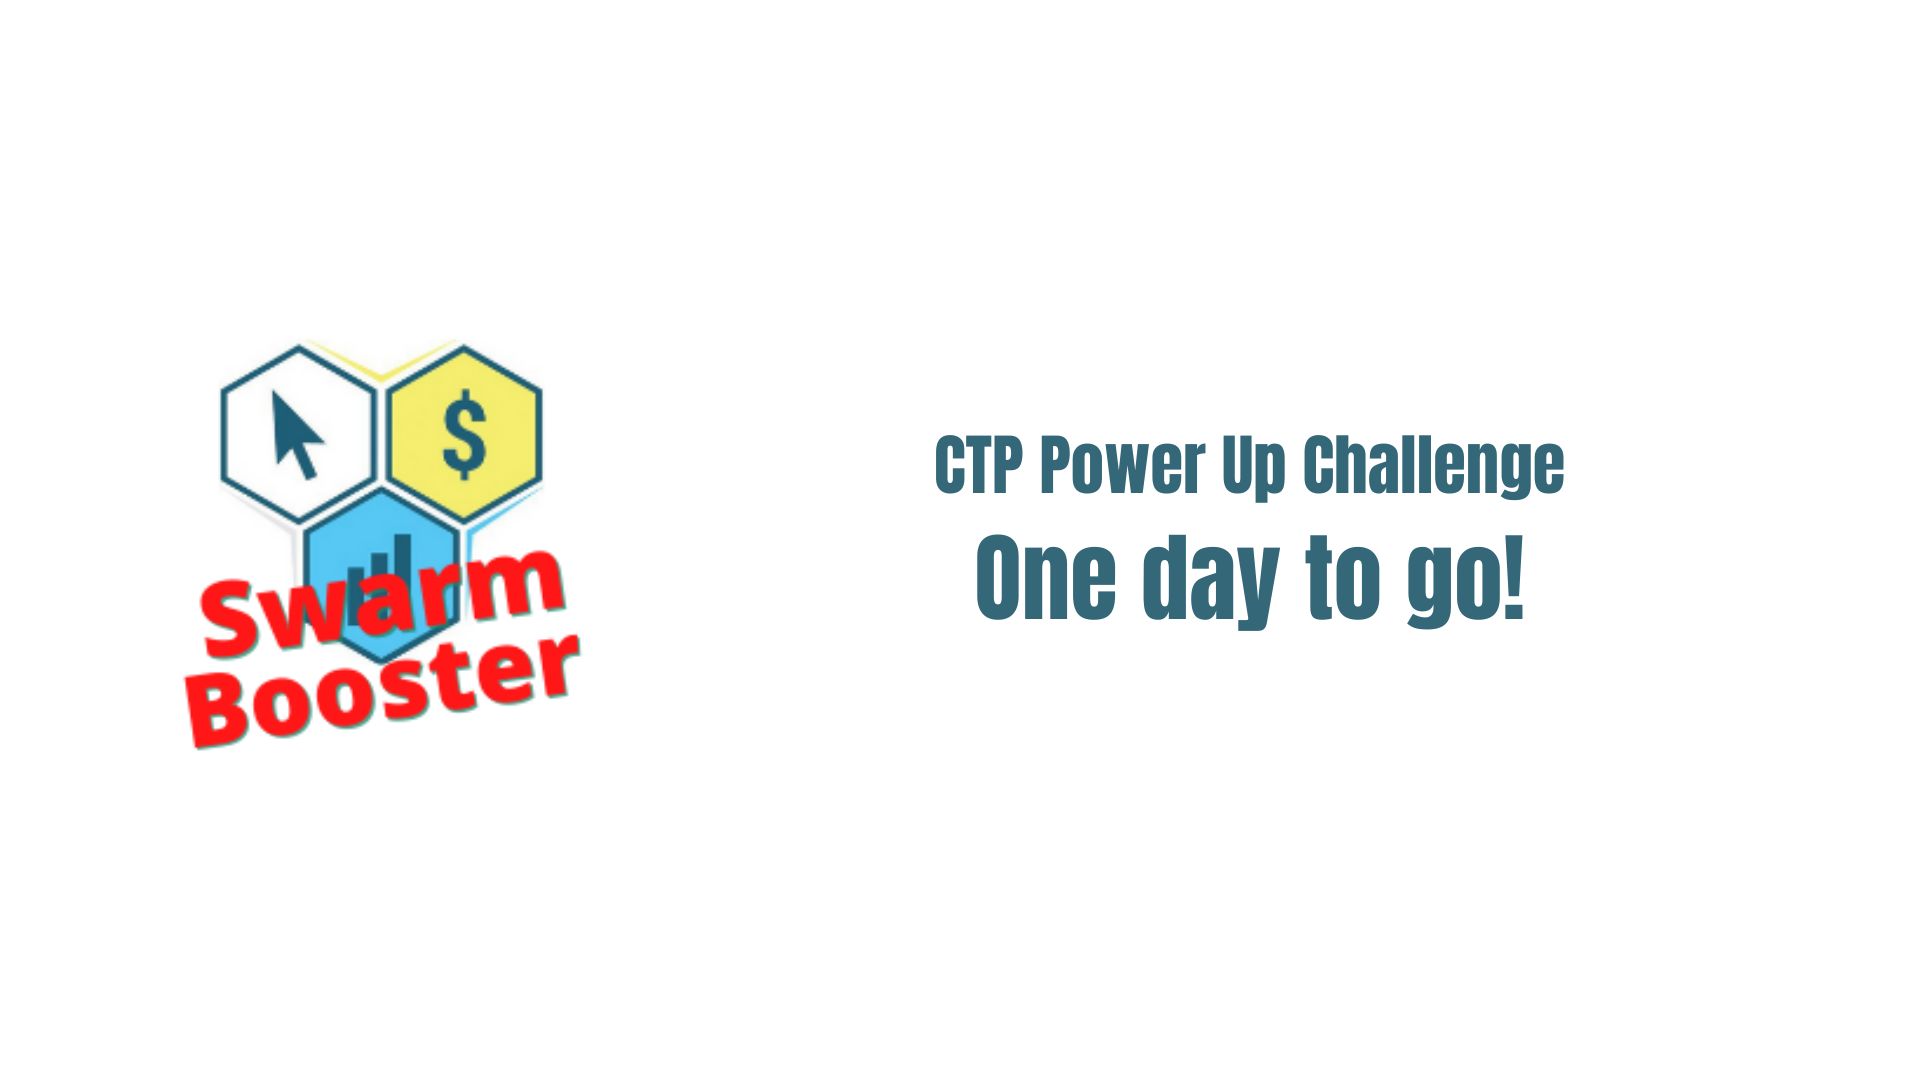 @ctpsb/one-day-to-go-in-the-ctp-power-up-challenge